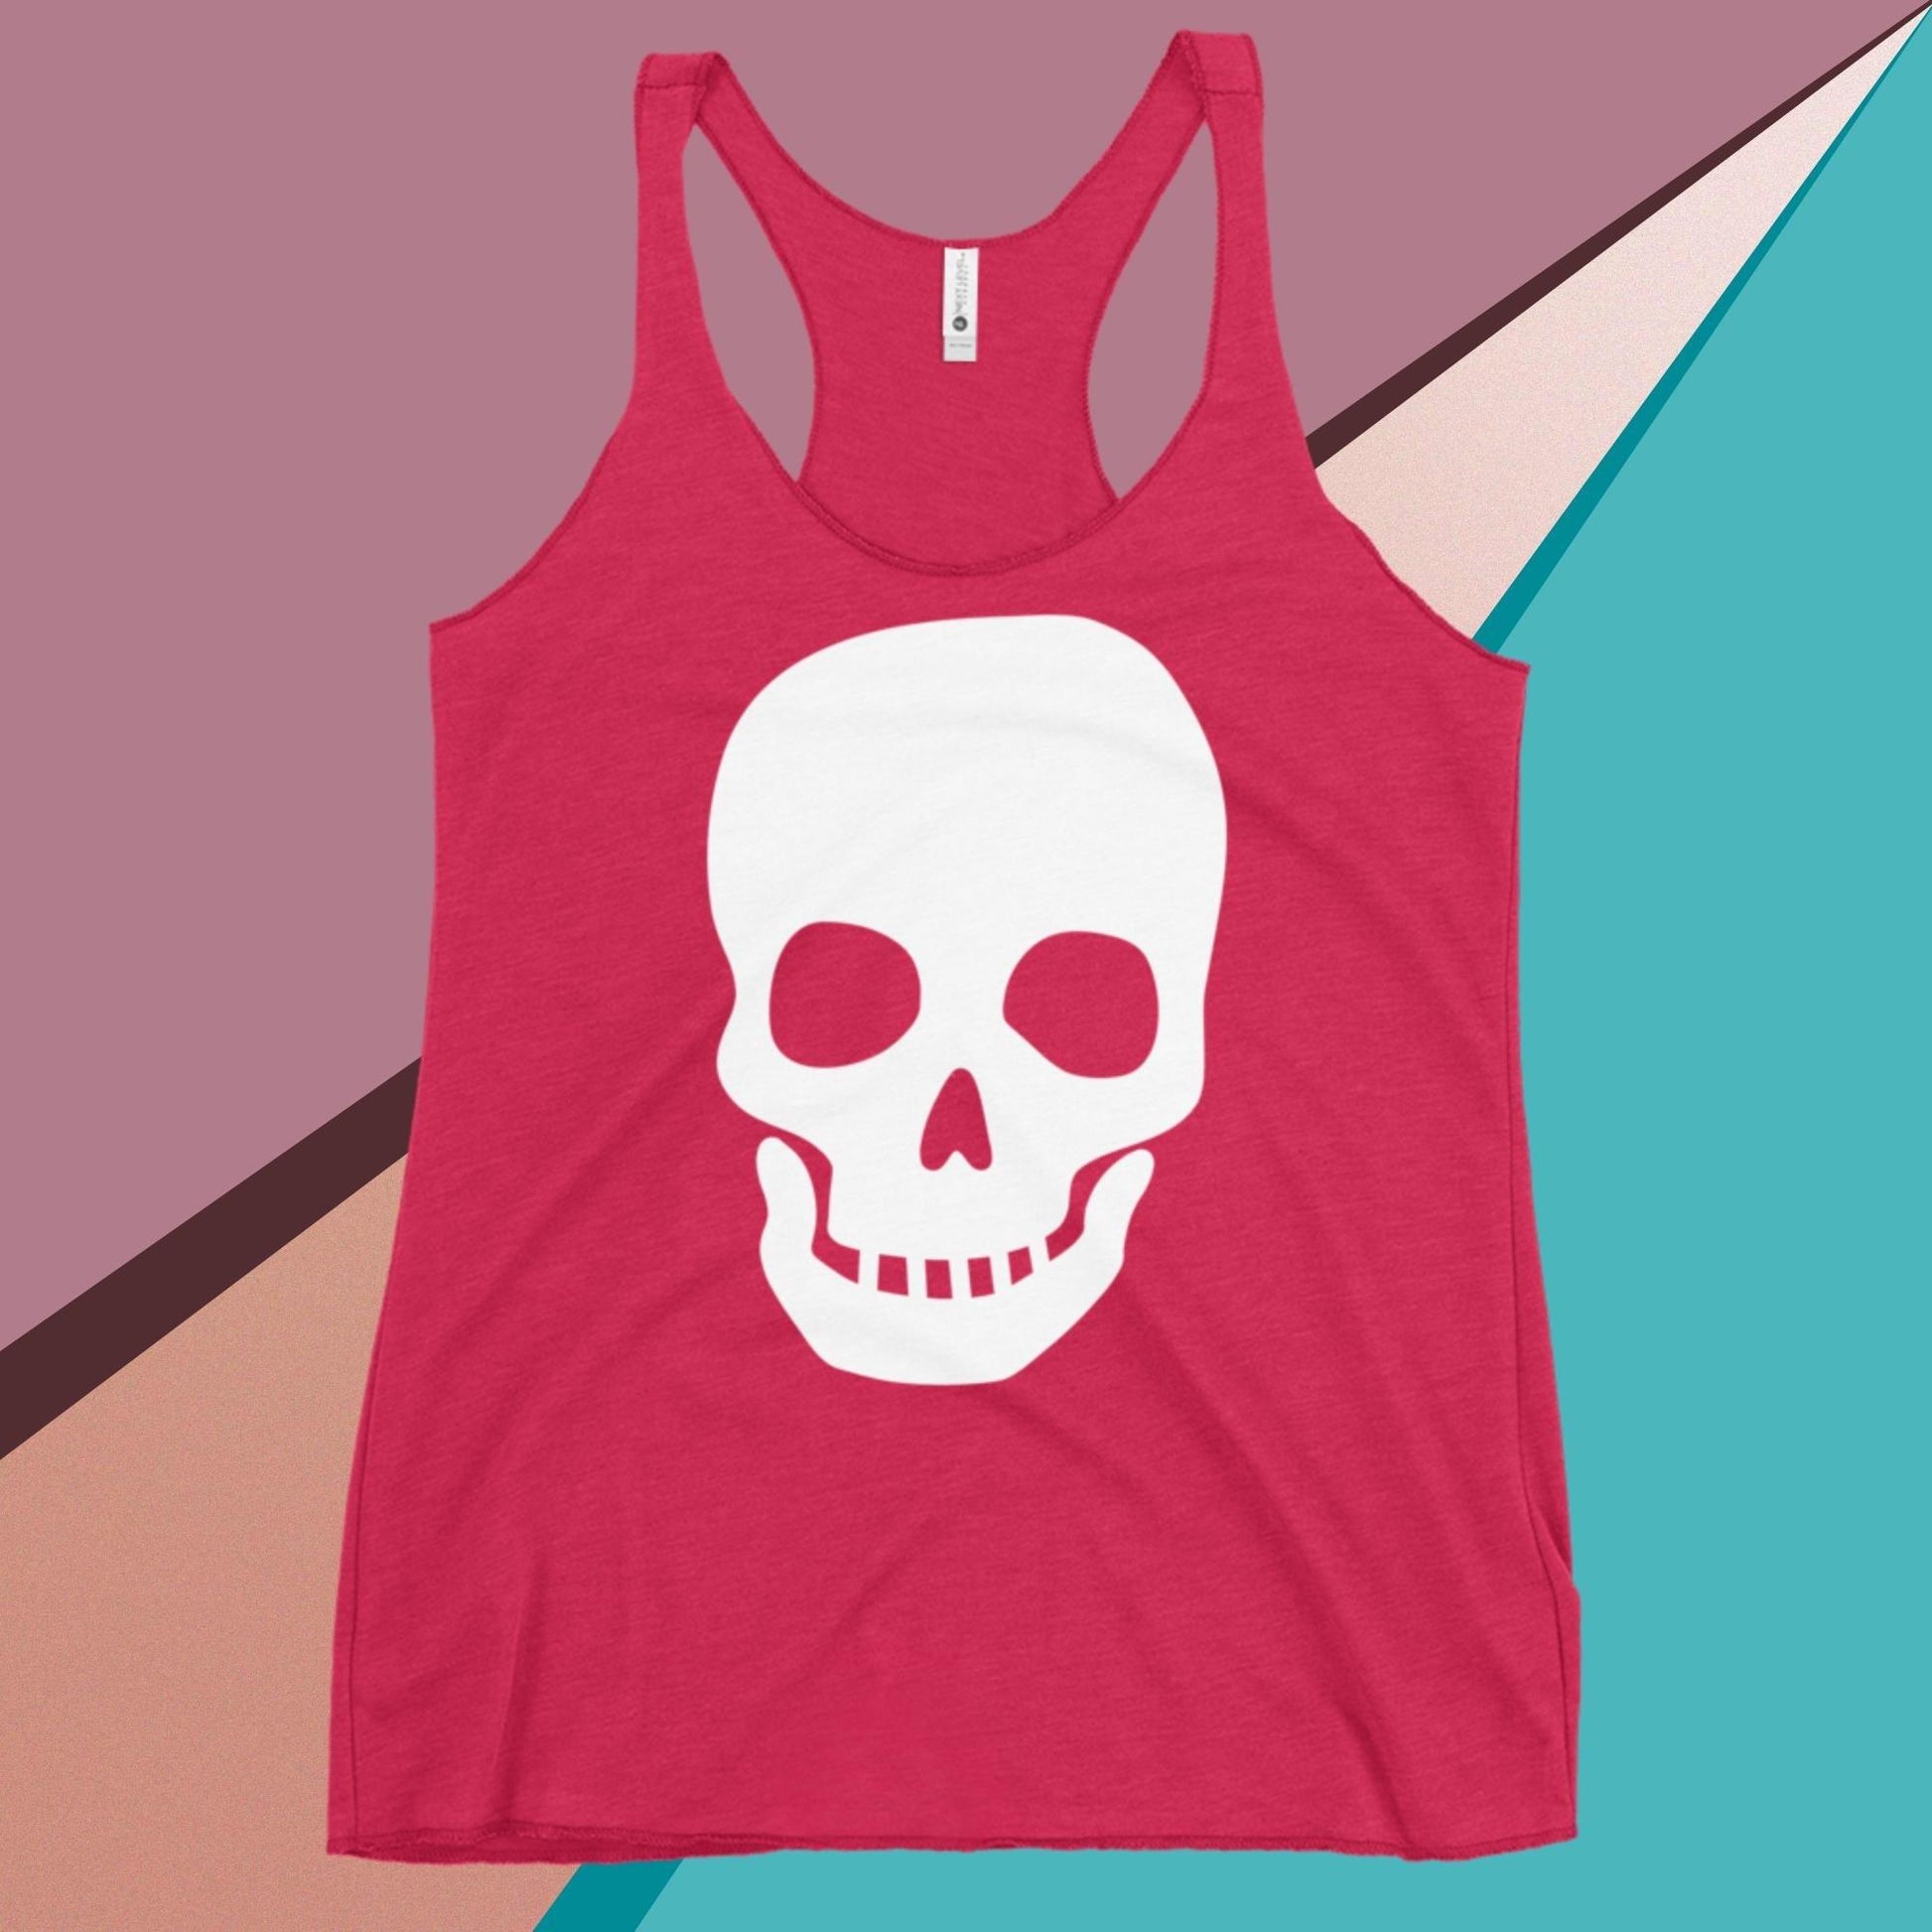 Reveal Your Inner Rebel with our Skull Women's Racerback Tank - Trendy, Edgy, and Unstoppable! - Lizard Vigilante